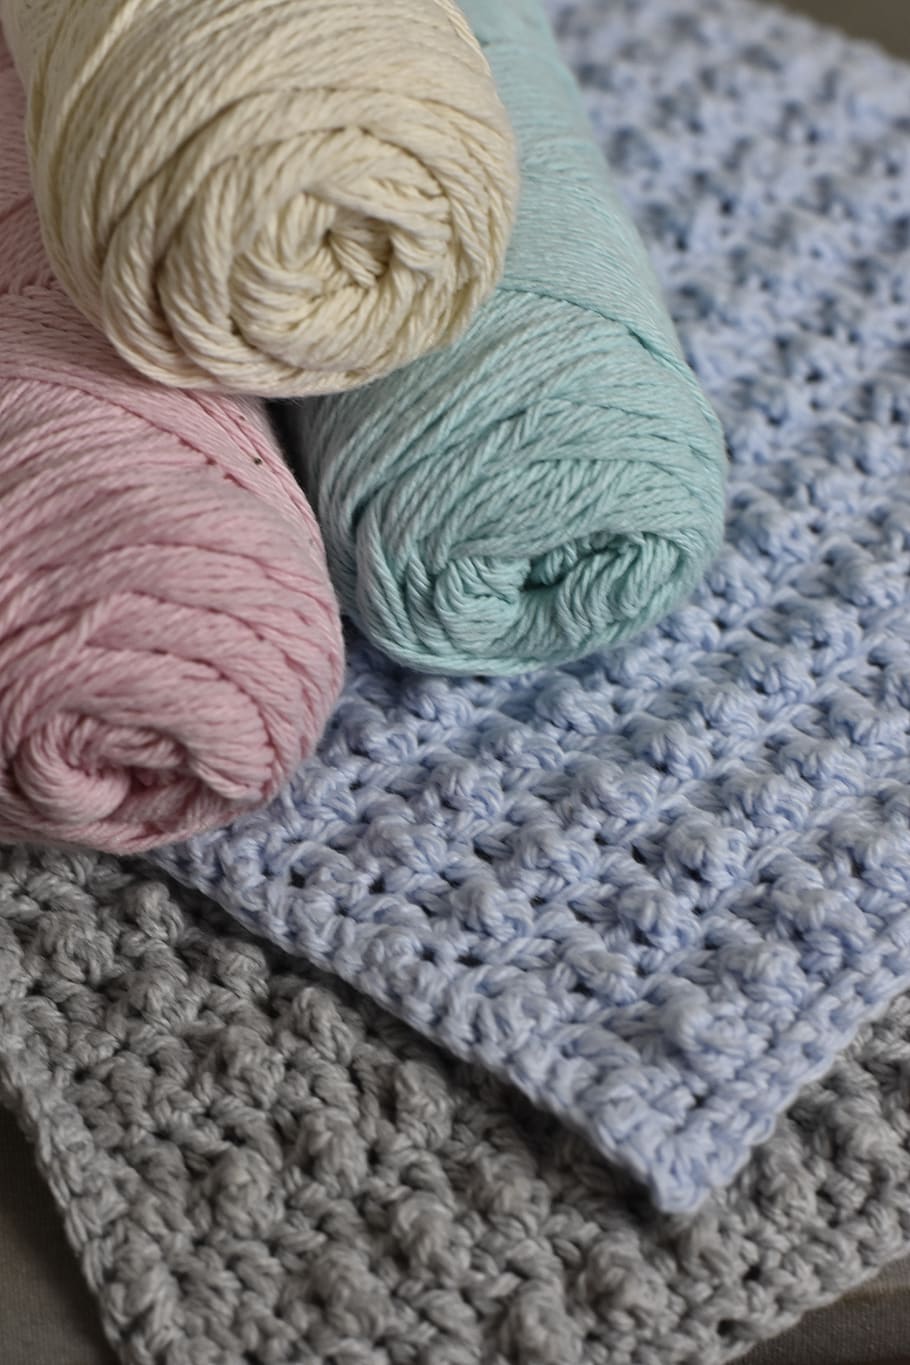 cotton, crochet, washcloth, pastel, textile, wool, indoors, close-up, art and craft, softness